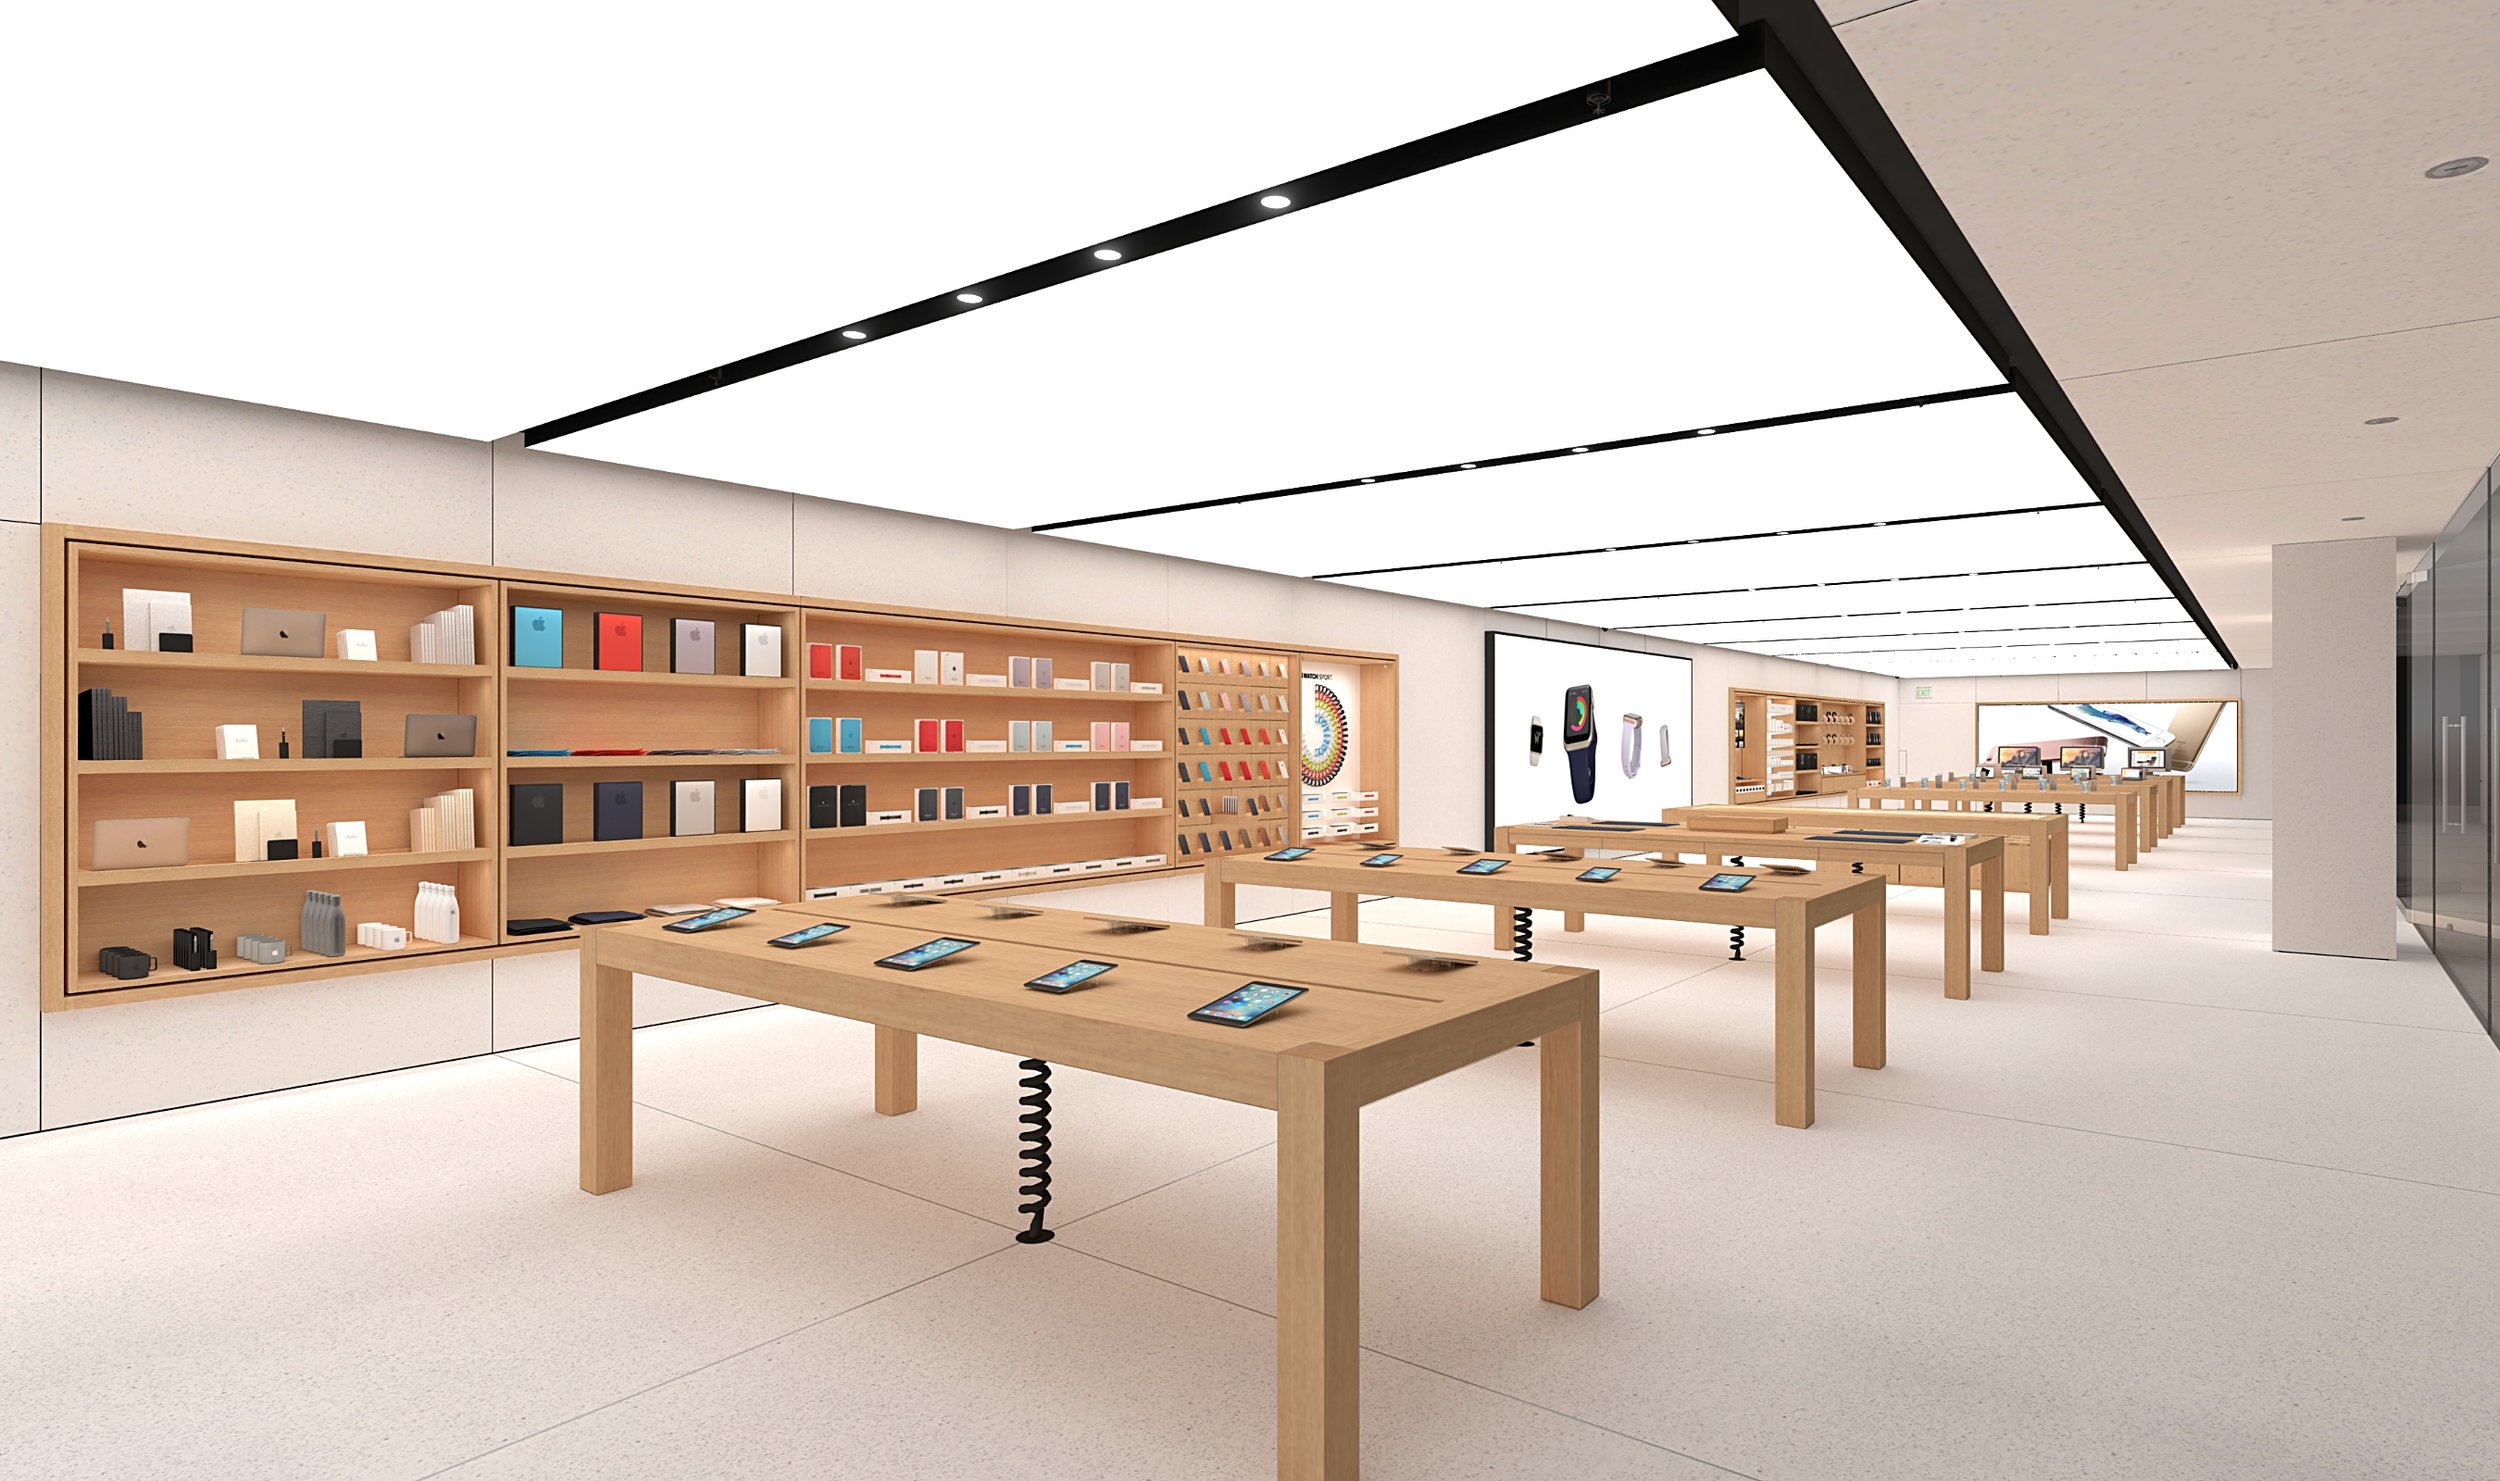 The Apple Store Time Machine